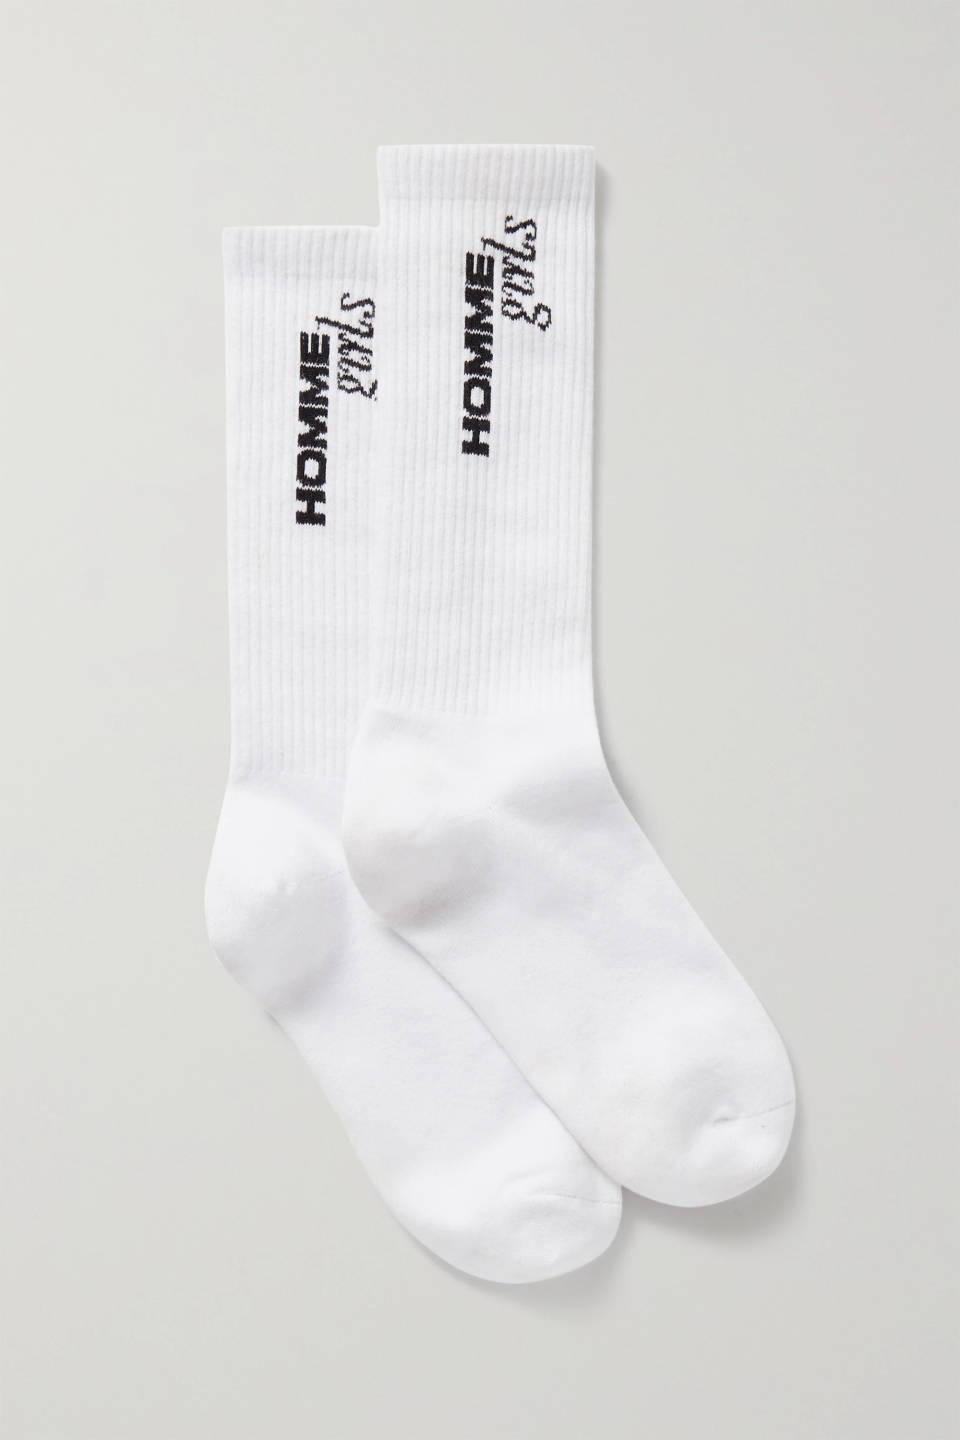 <h2>Hommegirls Ribbed Socks</h2><br>For those who like to wear their sandals with tube socks. These ones are from Thakoon Panichgul’s new brand, Hommegirls, which also includes a <a href="https://www.hommegirls.com/products/copy-of-copy-of-volume-6-lily-rose-depp" rel="nofollow noopener" target="_blank" data-ylk="slk:quarterly magazine" class="link rapid-noclick-resp">quarterly magazine</a> (this season, done in collaboration with Chanel). <br><br><strong>Hommegirls</strong> Intarsia Ribbed Stretch Cotton-Blend Socks, $, available at <a href="https://go.skimresources.com/?id=30283X879131&url=https%3A%2F%2Fwww.net-a-porter.com%2Fen-us%2Fshop%2Fproduct%2Fhommegirls%2Flingerie%2Fsocks%2Fintarsia-ribbed-stretch-cotton-blend-socks%2F9649229528823354" rel="nofollow noopener" target="_blank" data-ylk="slk:Net-A-Porter" class="link rapid-noclick-resp">Net-A-Porter</a>